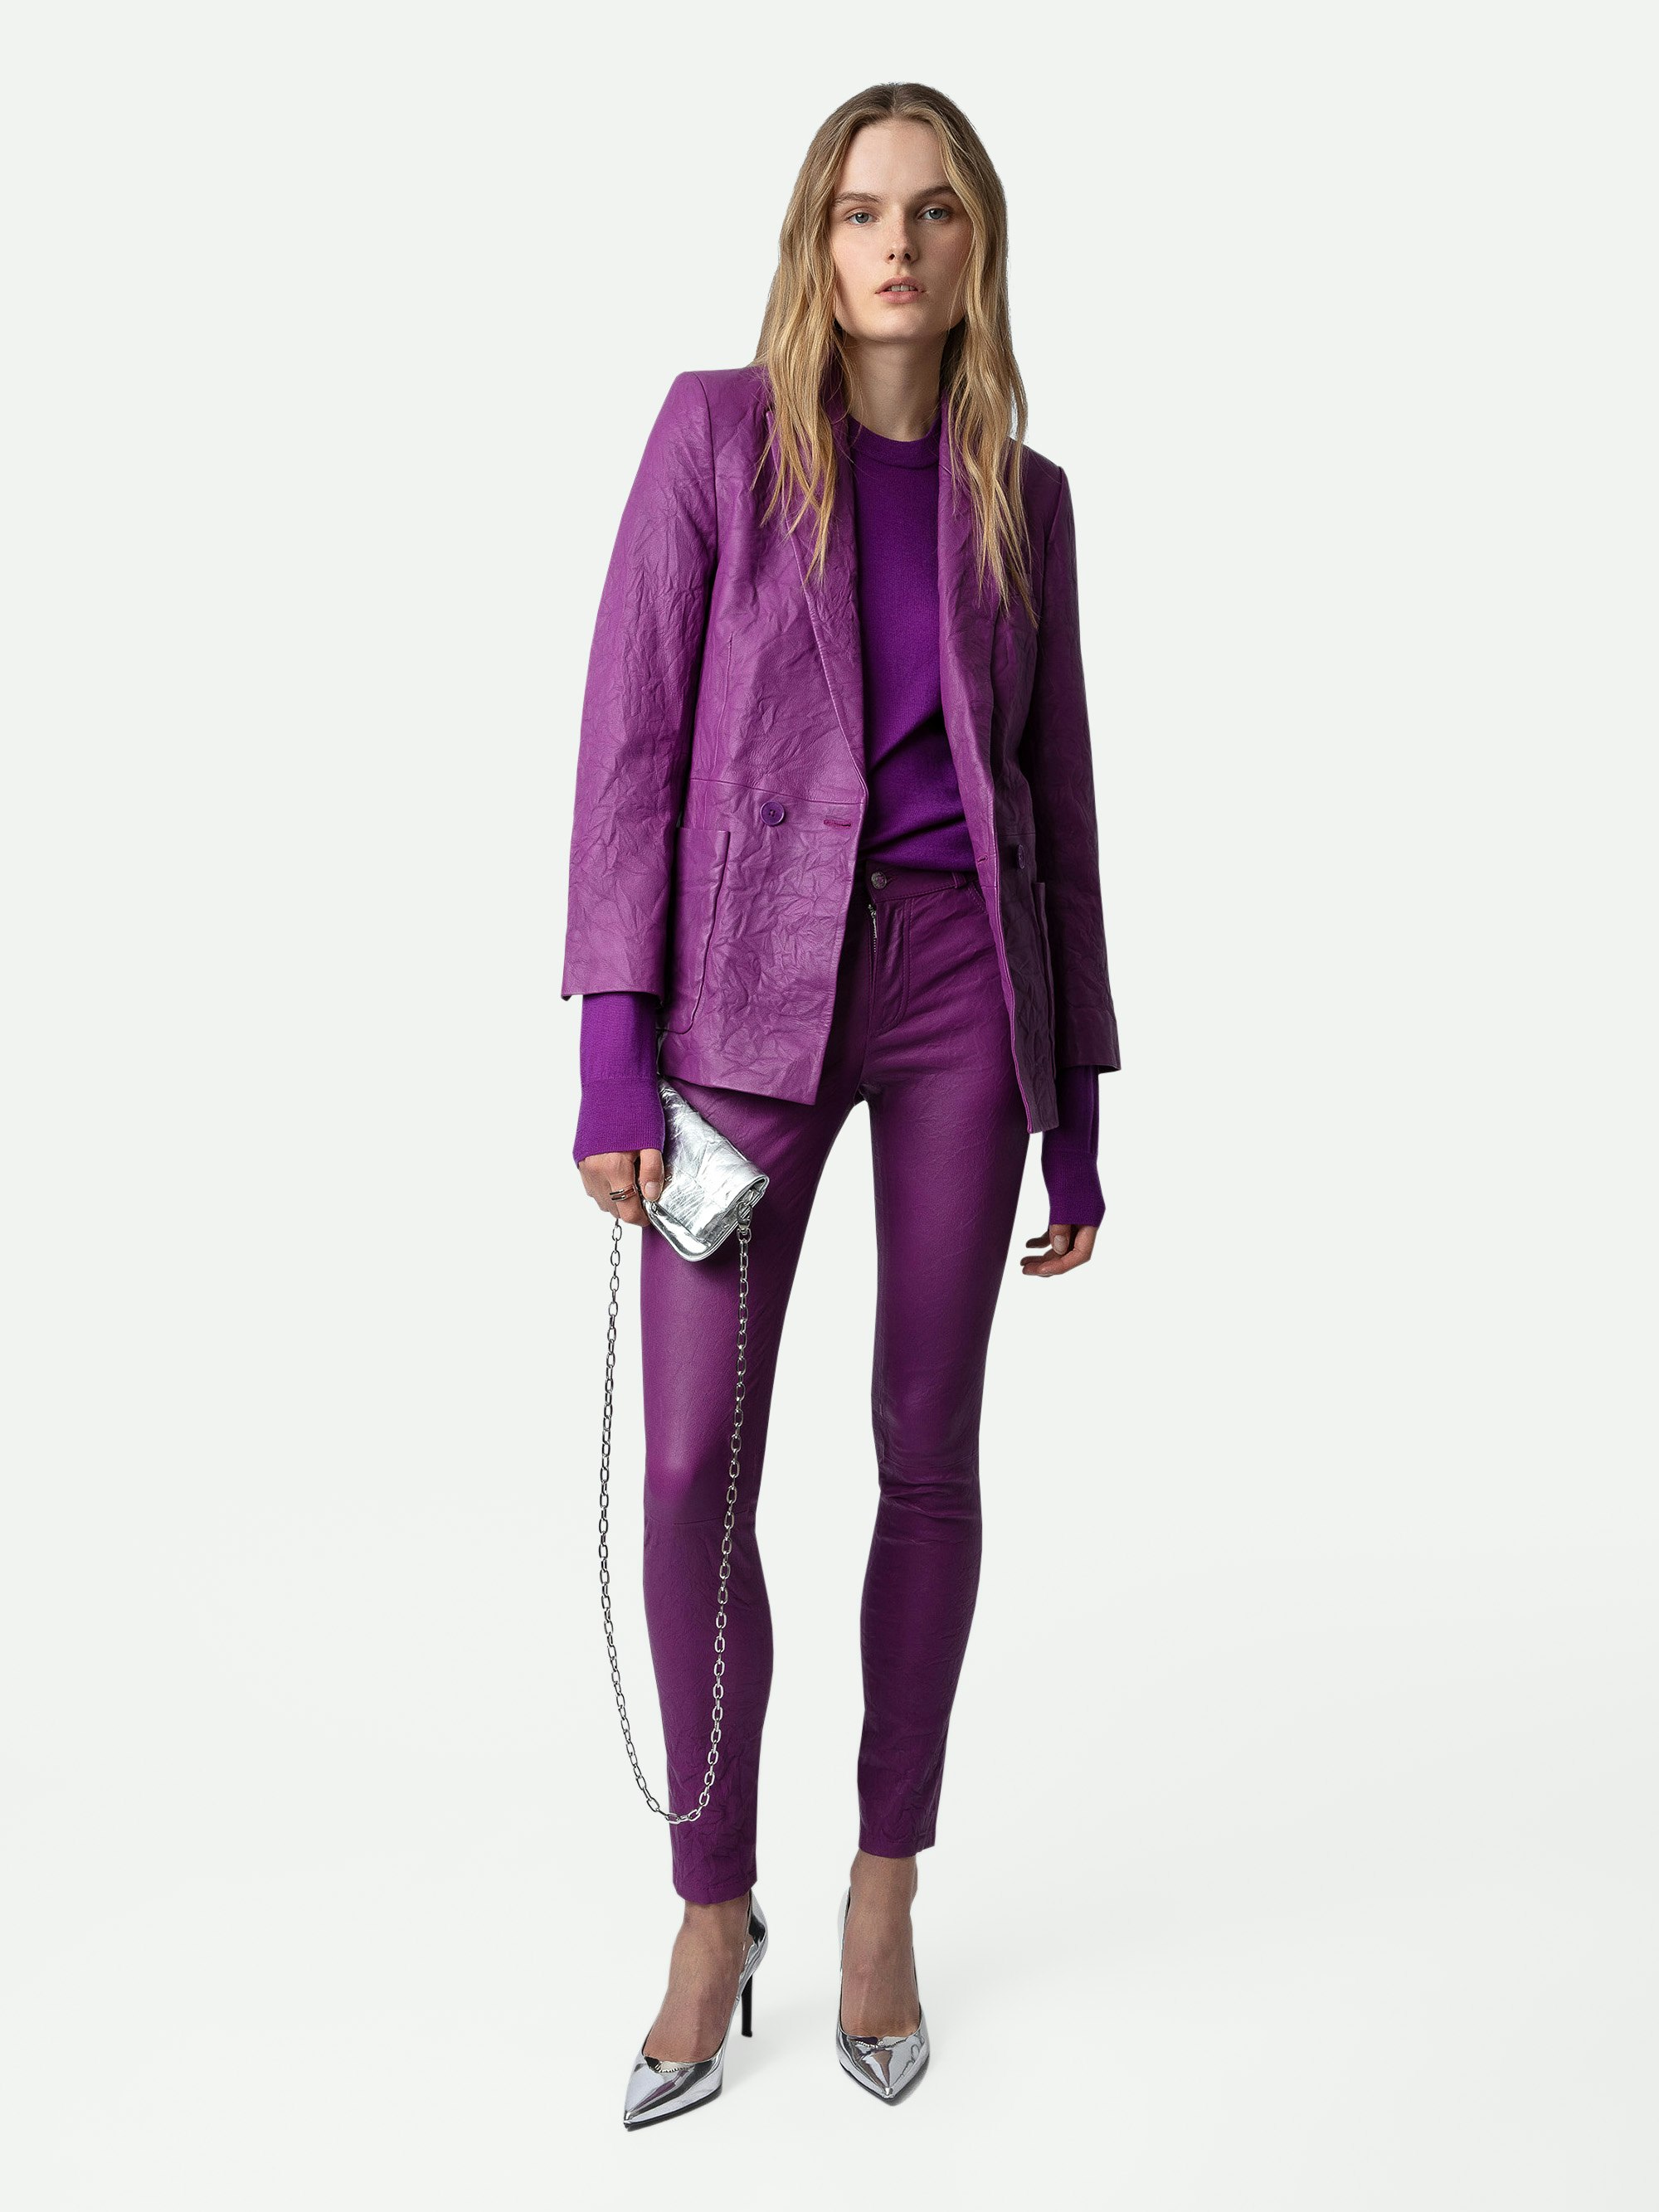 Phlame Crinkled Leather Pants - Purple crinkled leather pants with pockets.